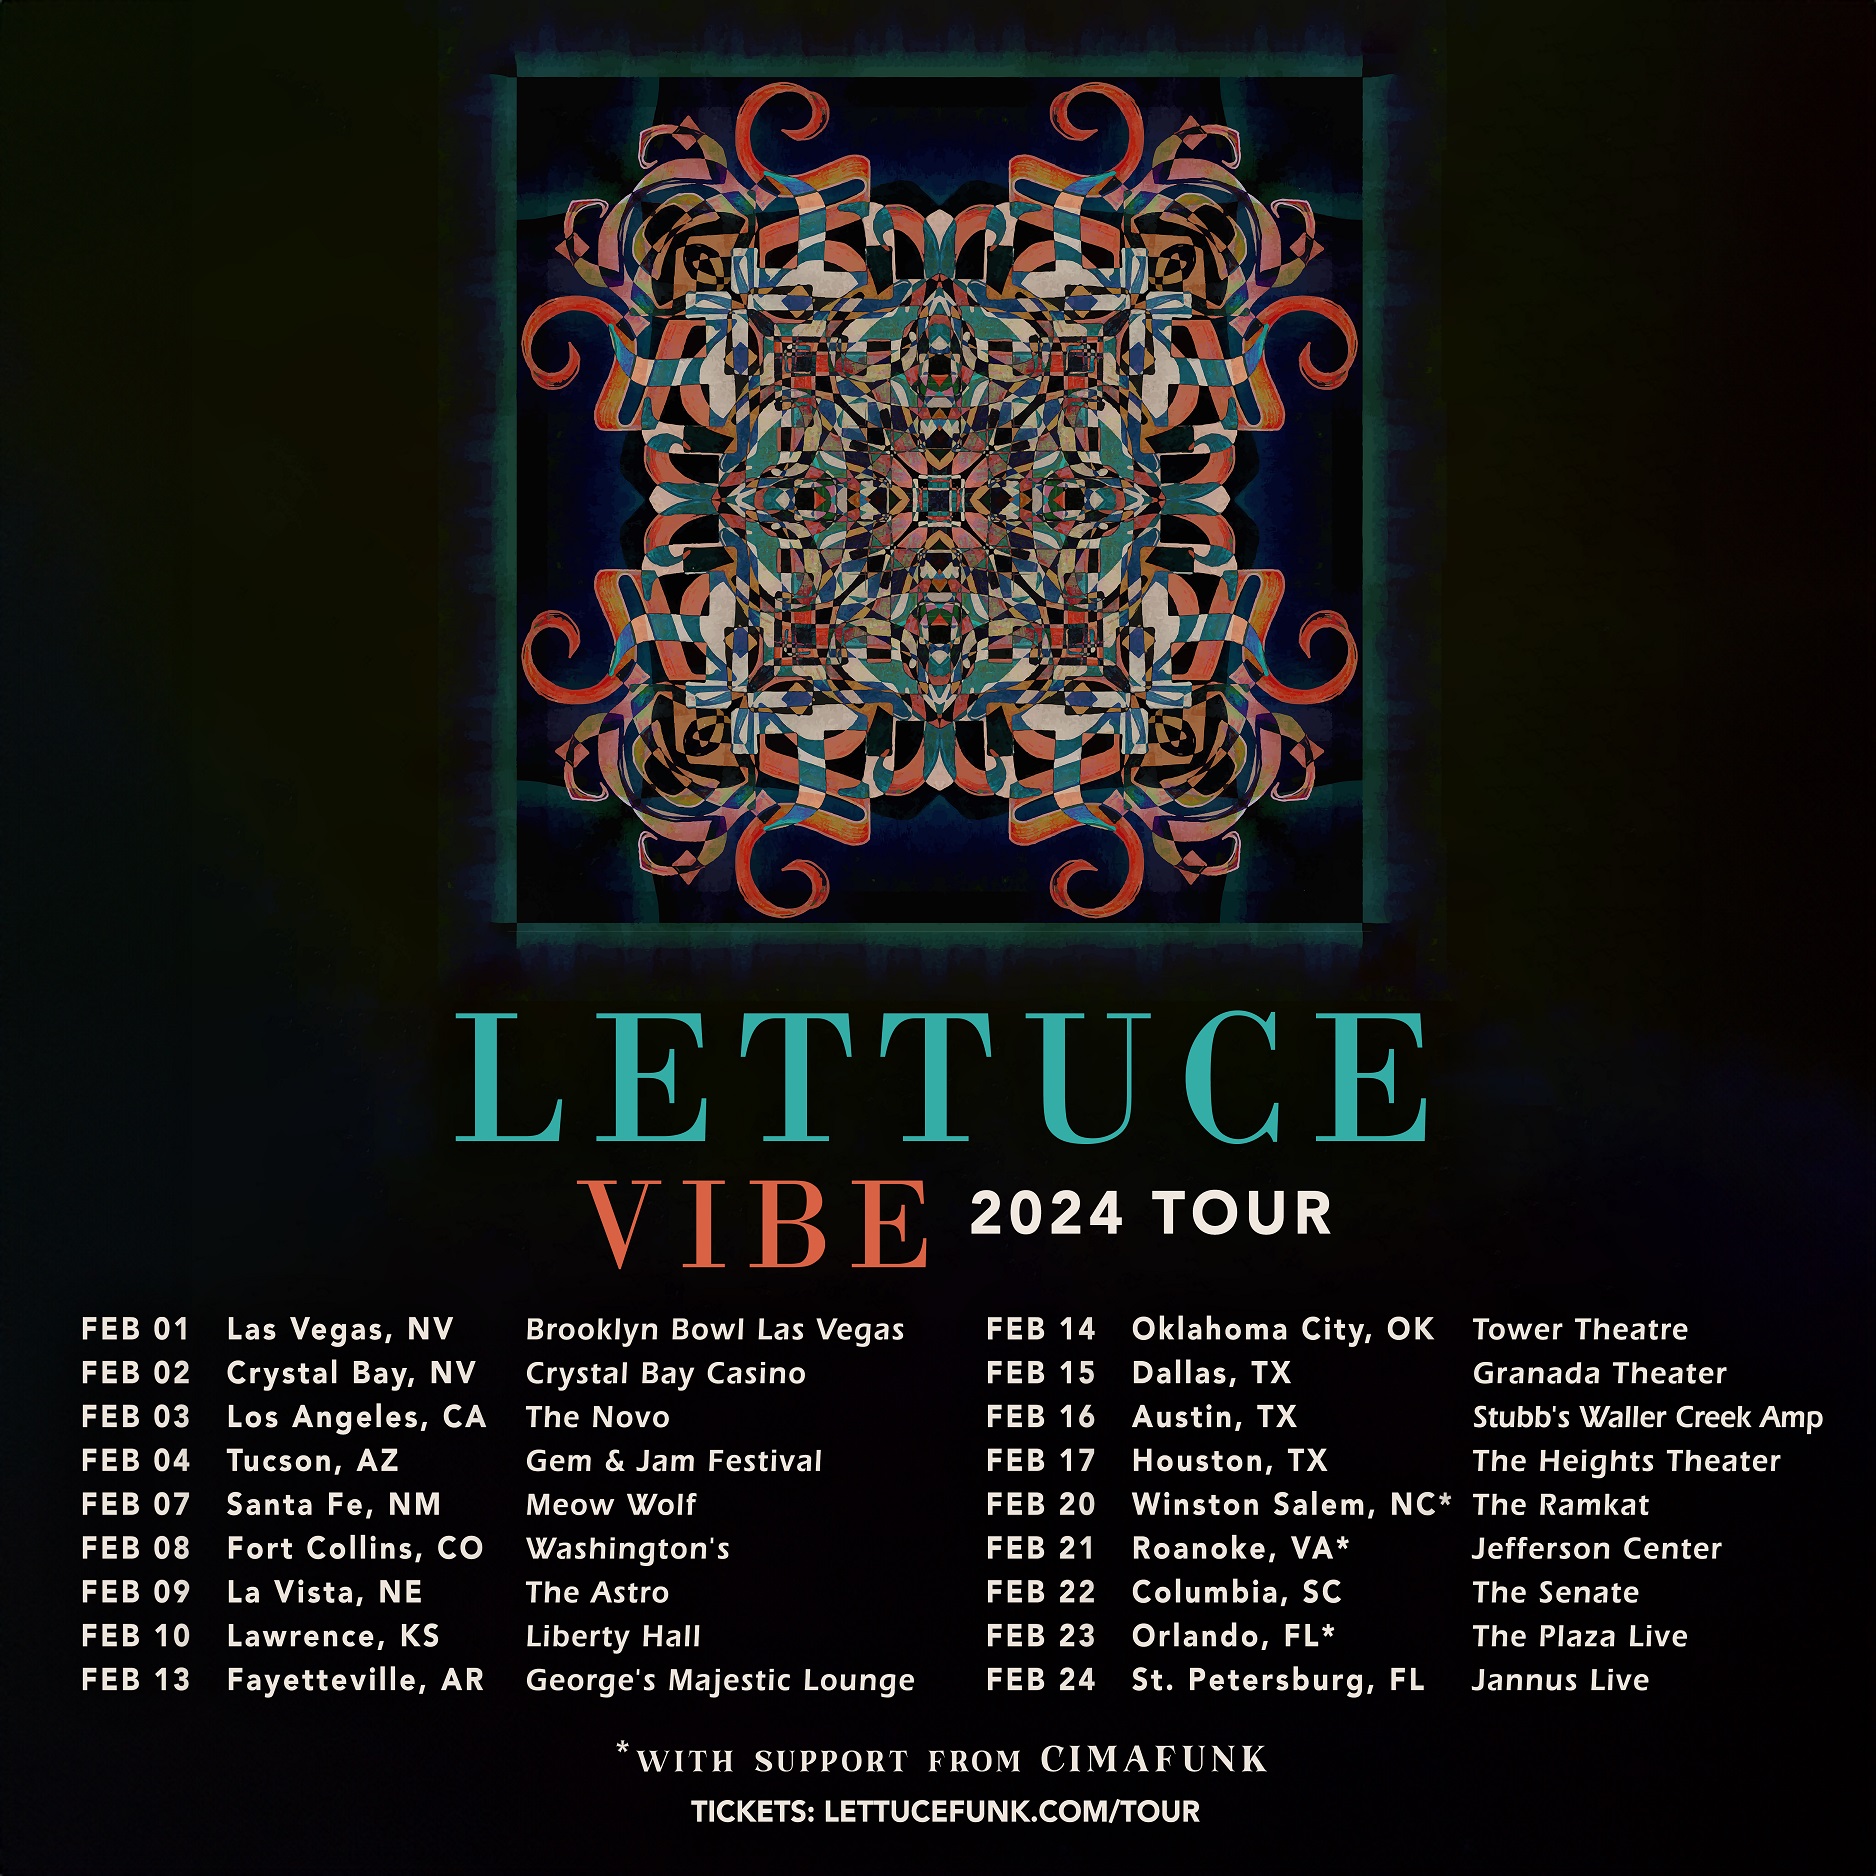 Lettuce Reveals the First-Ever Digital Release of 'VIBE,' a 48-minute Journey of Improvisation Accompanied by a National Tour in February